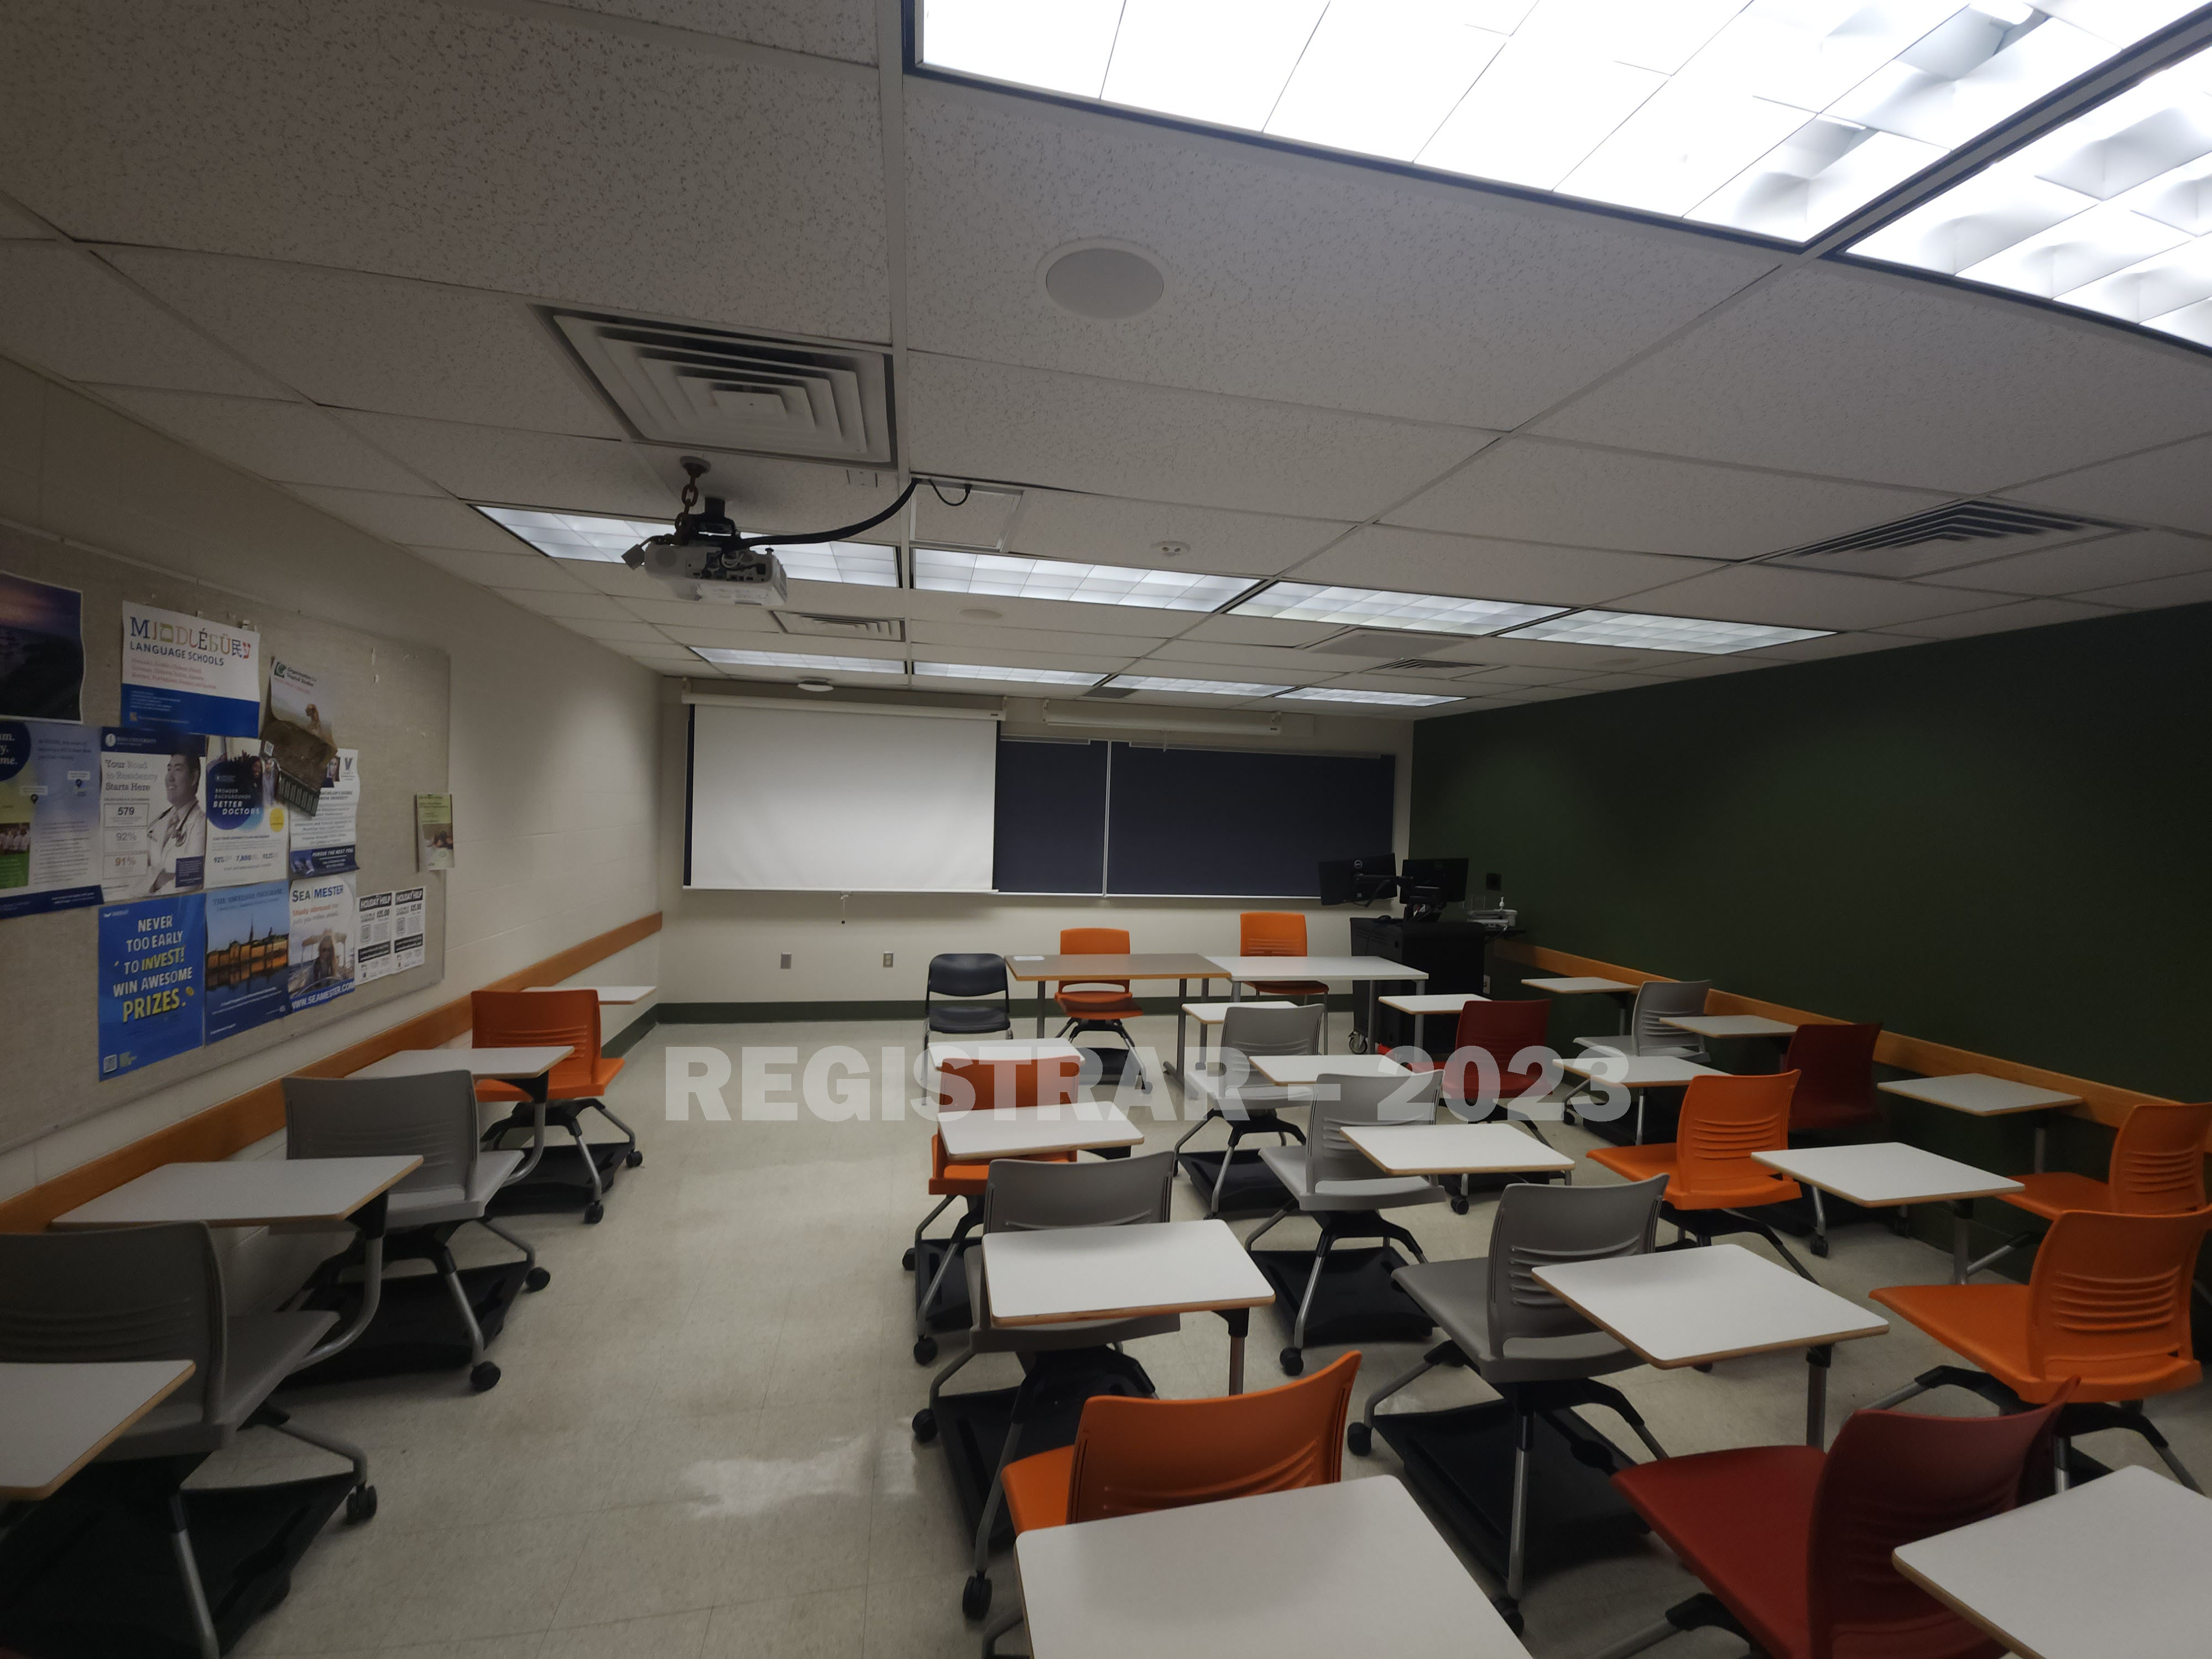 Journalism Building room 221 ultra wide angle view from the back of the room with projector screen down